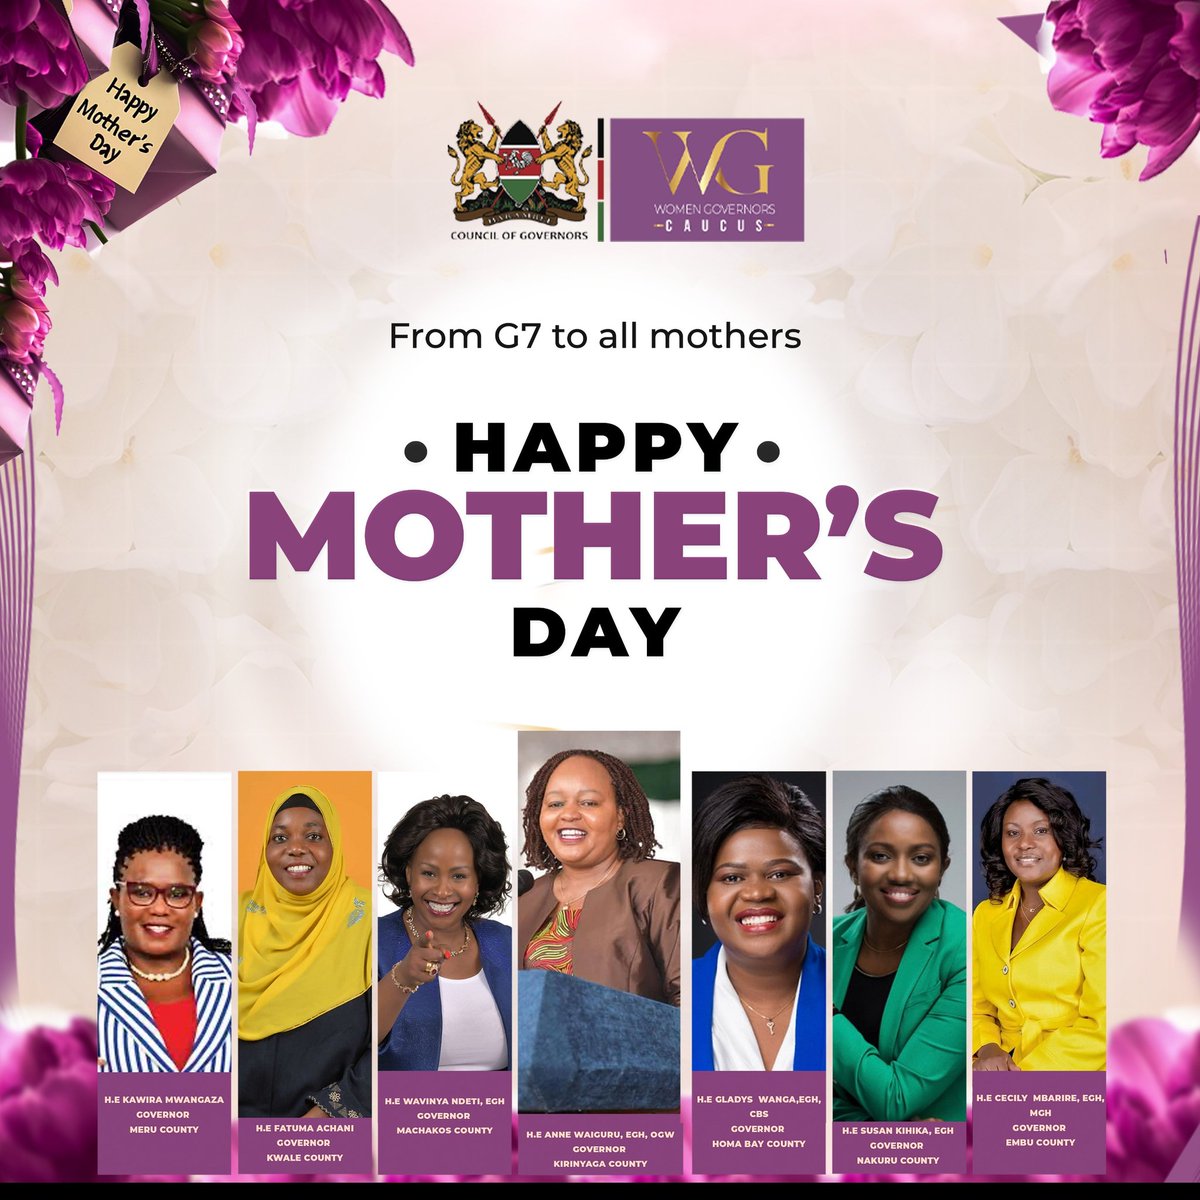 The Council of Governors extends heartfelt gratitude to all mothers, who tirelessly nurture, guide, and inspire. Your dedication shapes the future of our communities. Happy Mother's Day from @KenyaGovernors and the COG Women Governors Caucus 💖 #MothersDay